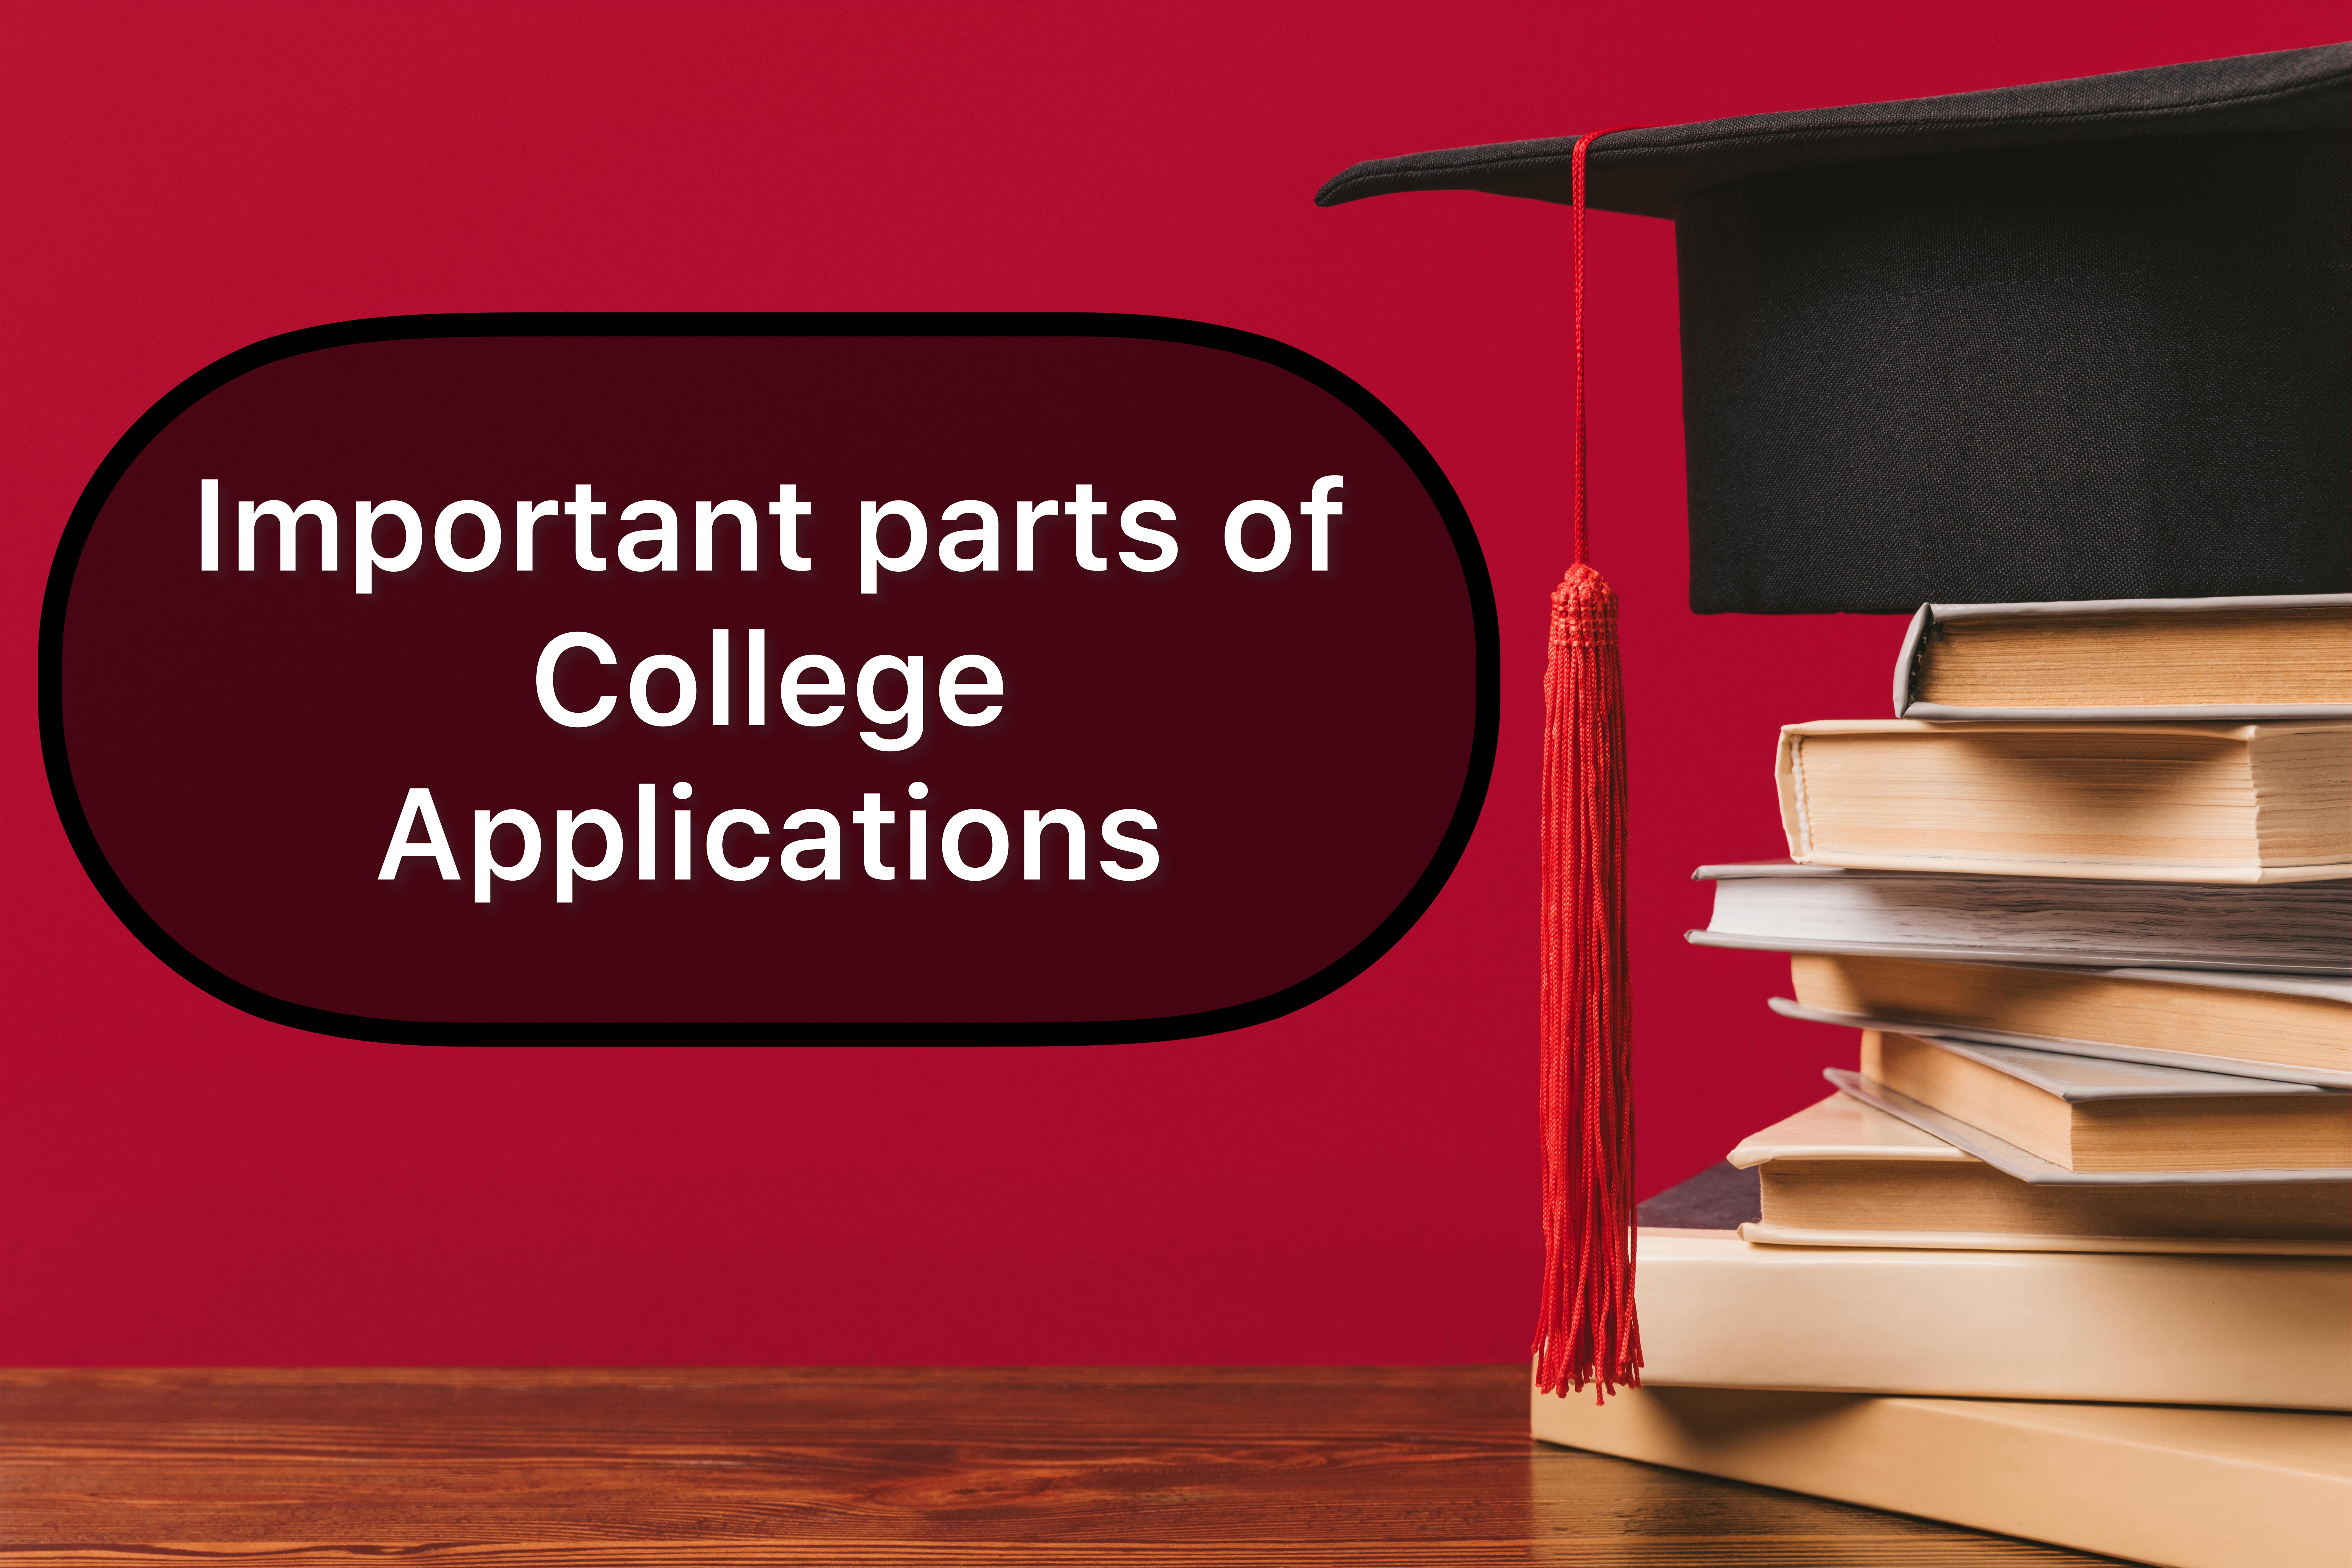 What are the most important parts of a college application?